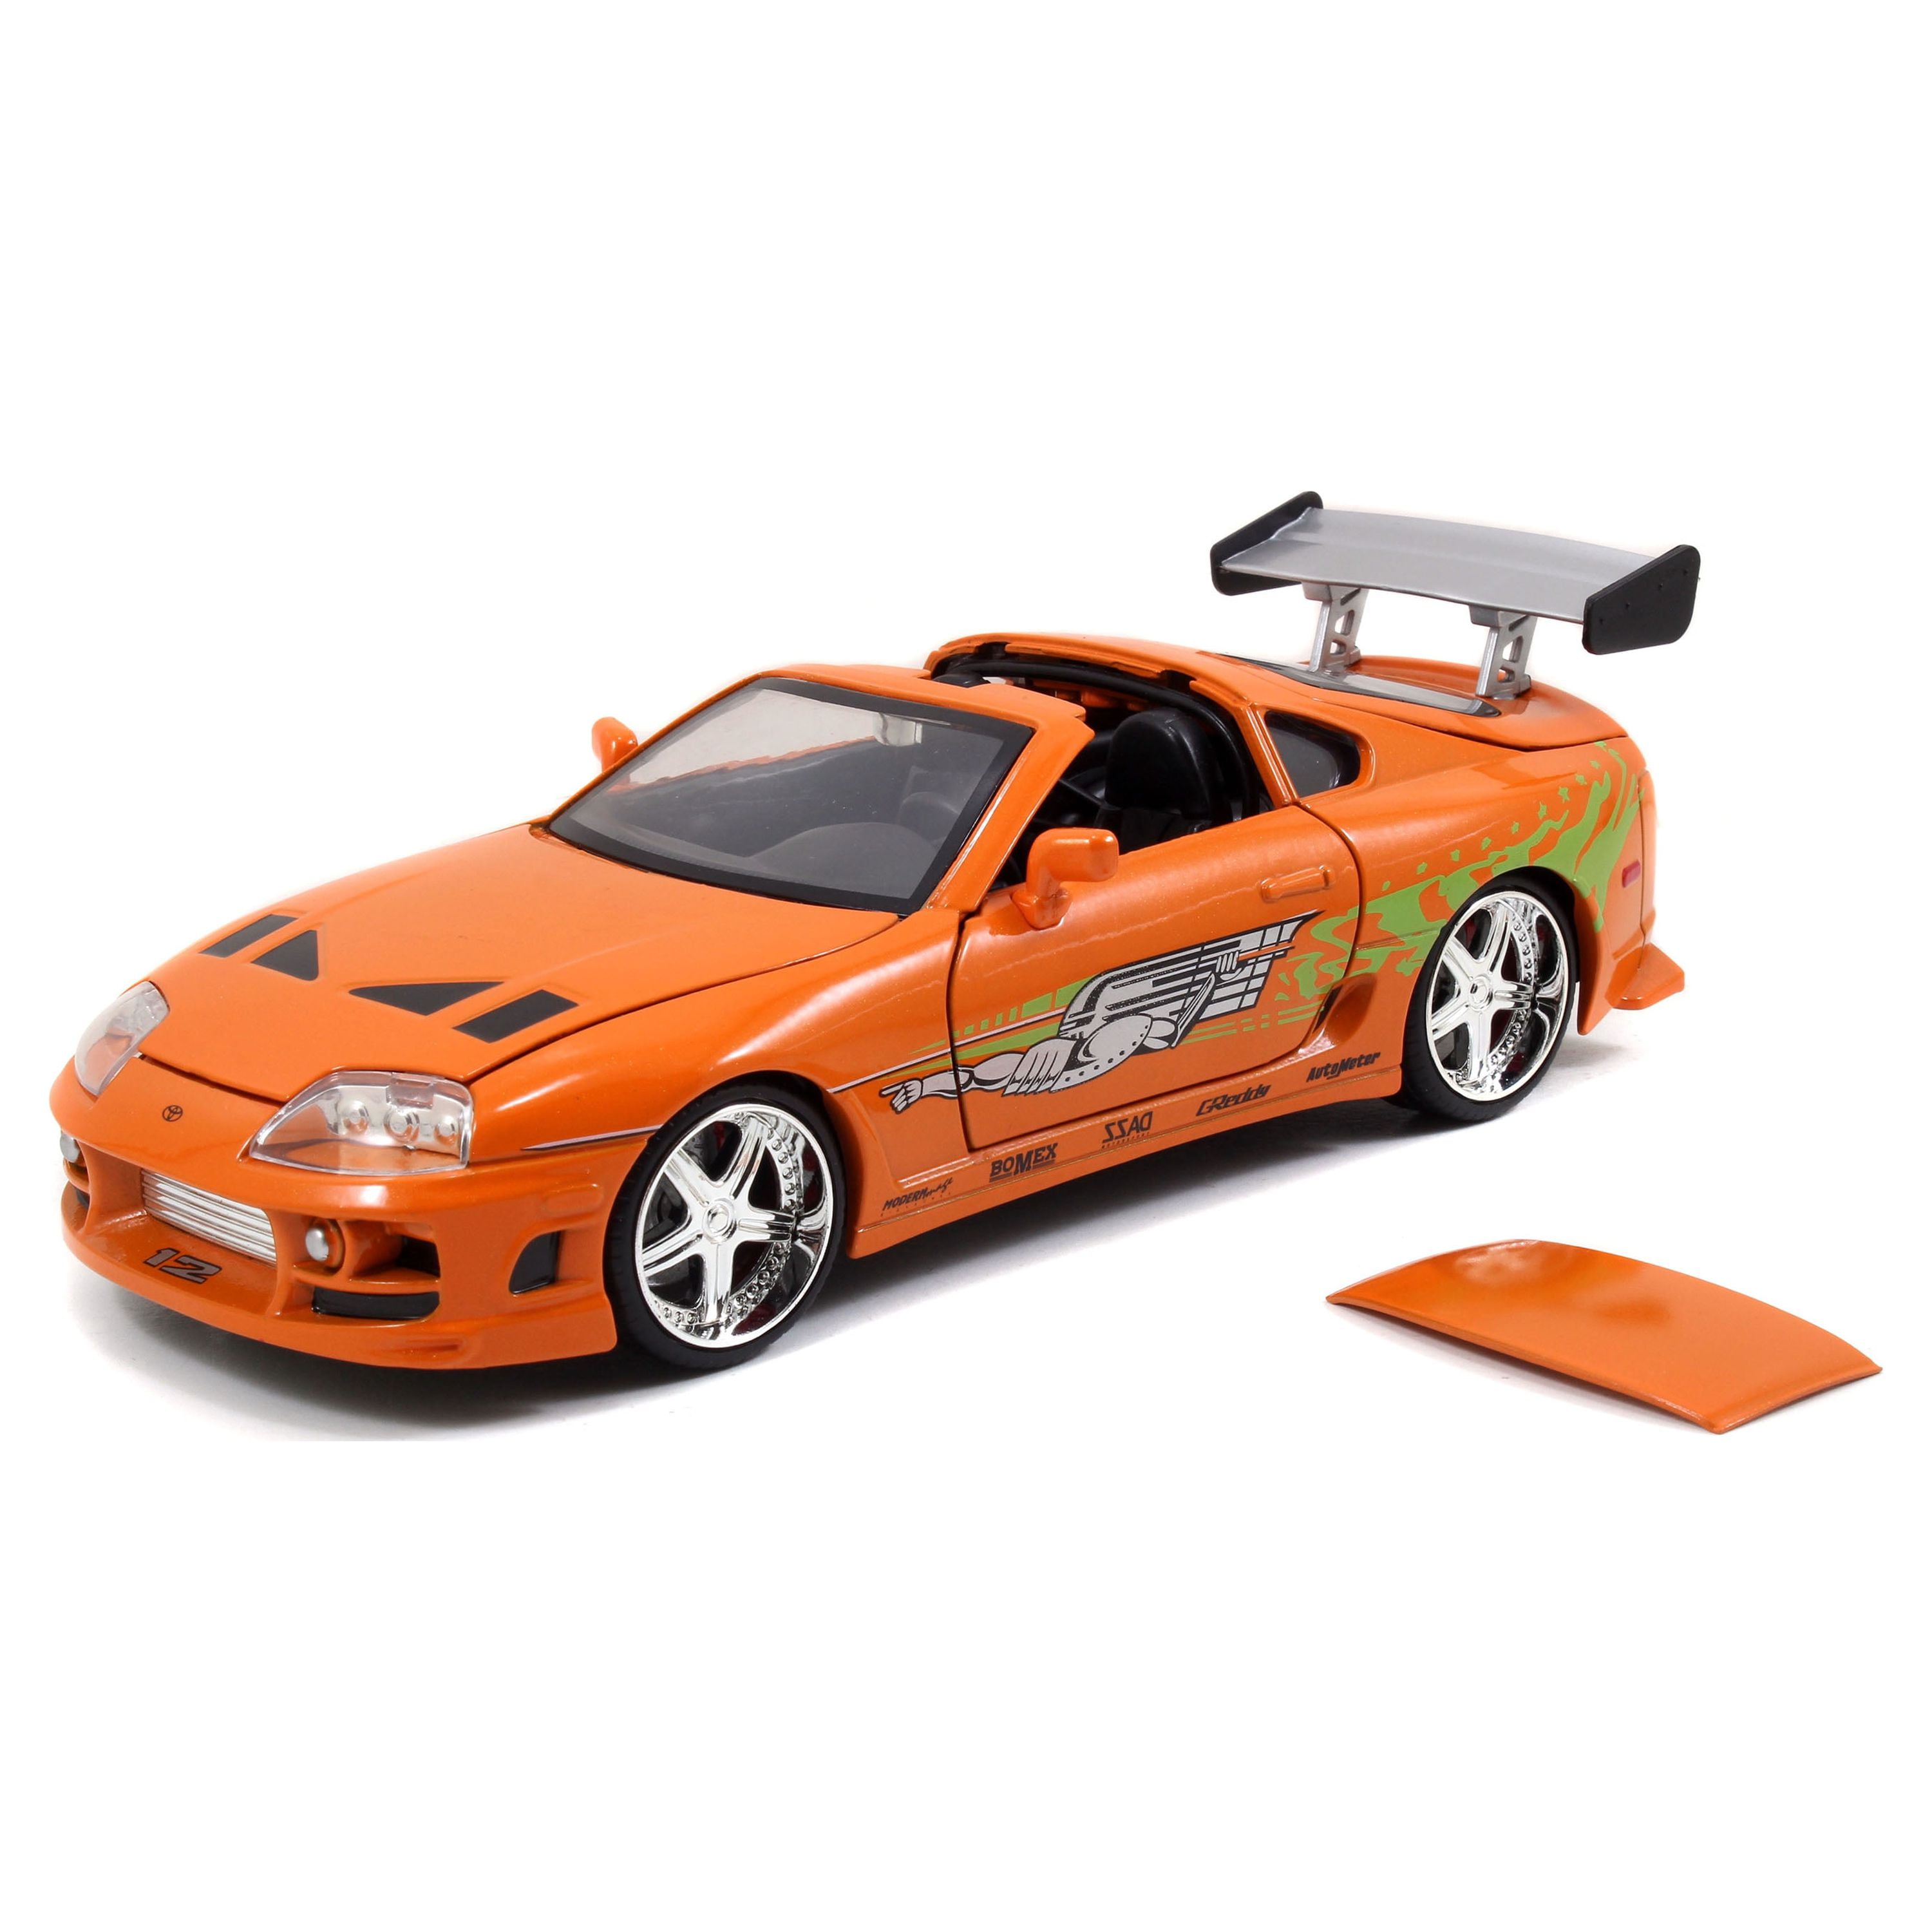  Jada Toys Fast & Furious Brian & Toyota Supra, 1:24 Scale Build  n' Collect Die-Cast Model Kit with 2.75 Die-Cast Figure , Orange : Arts,  Crafts & Sewing